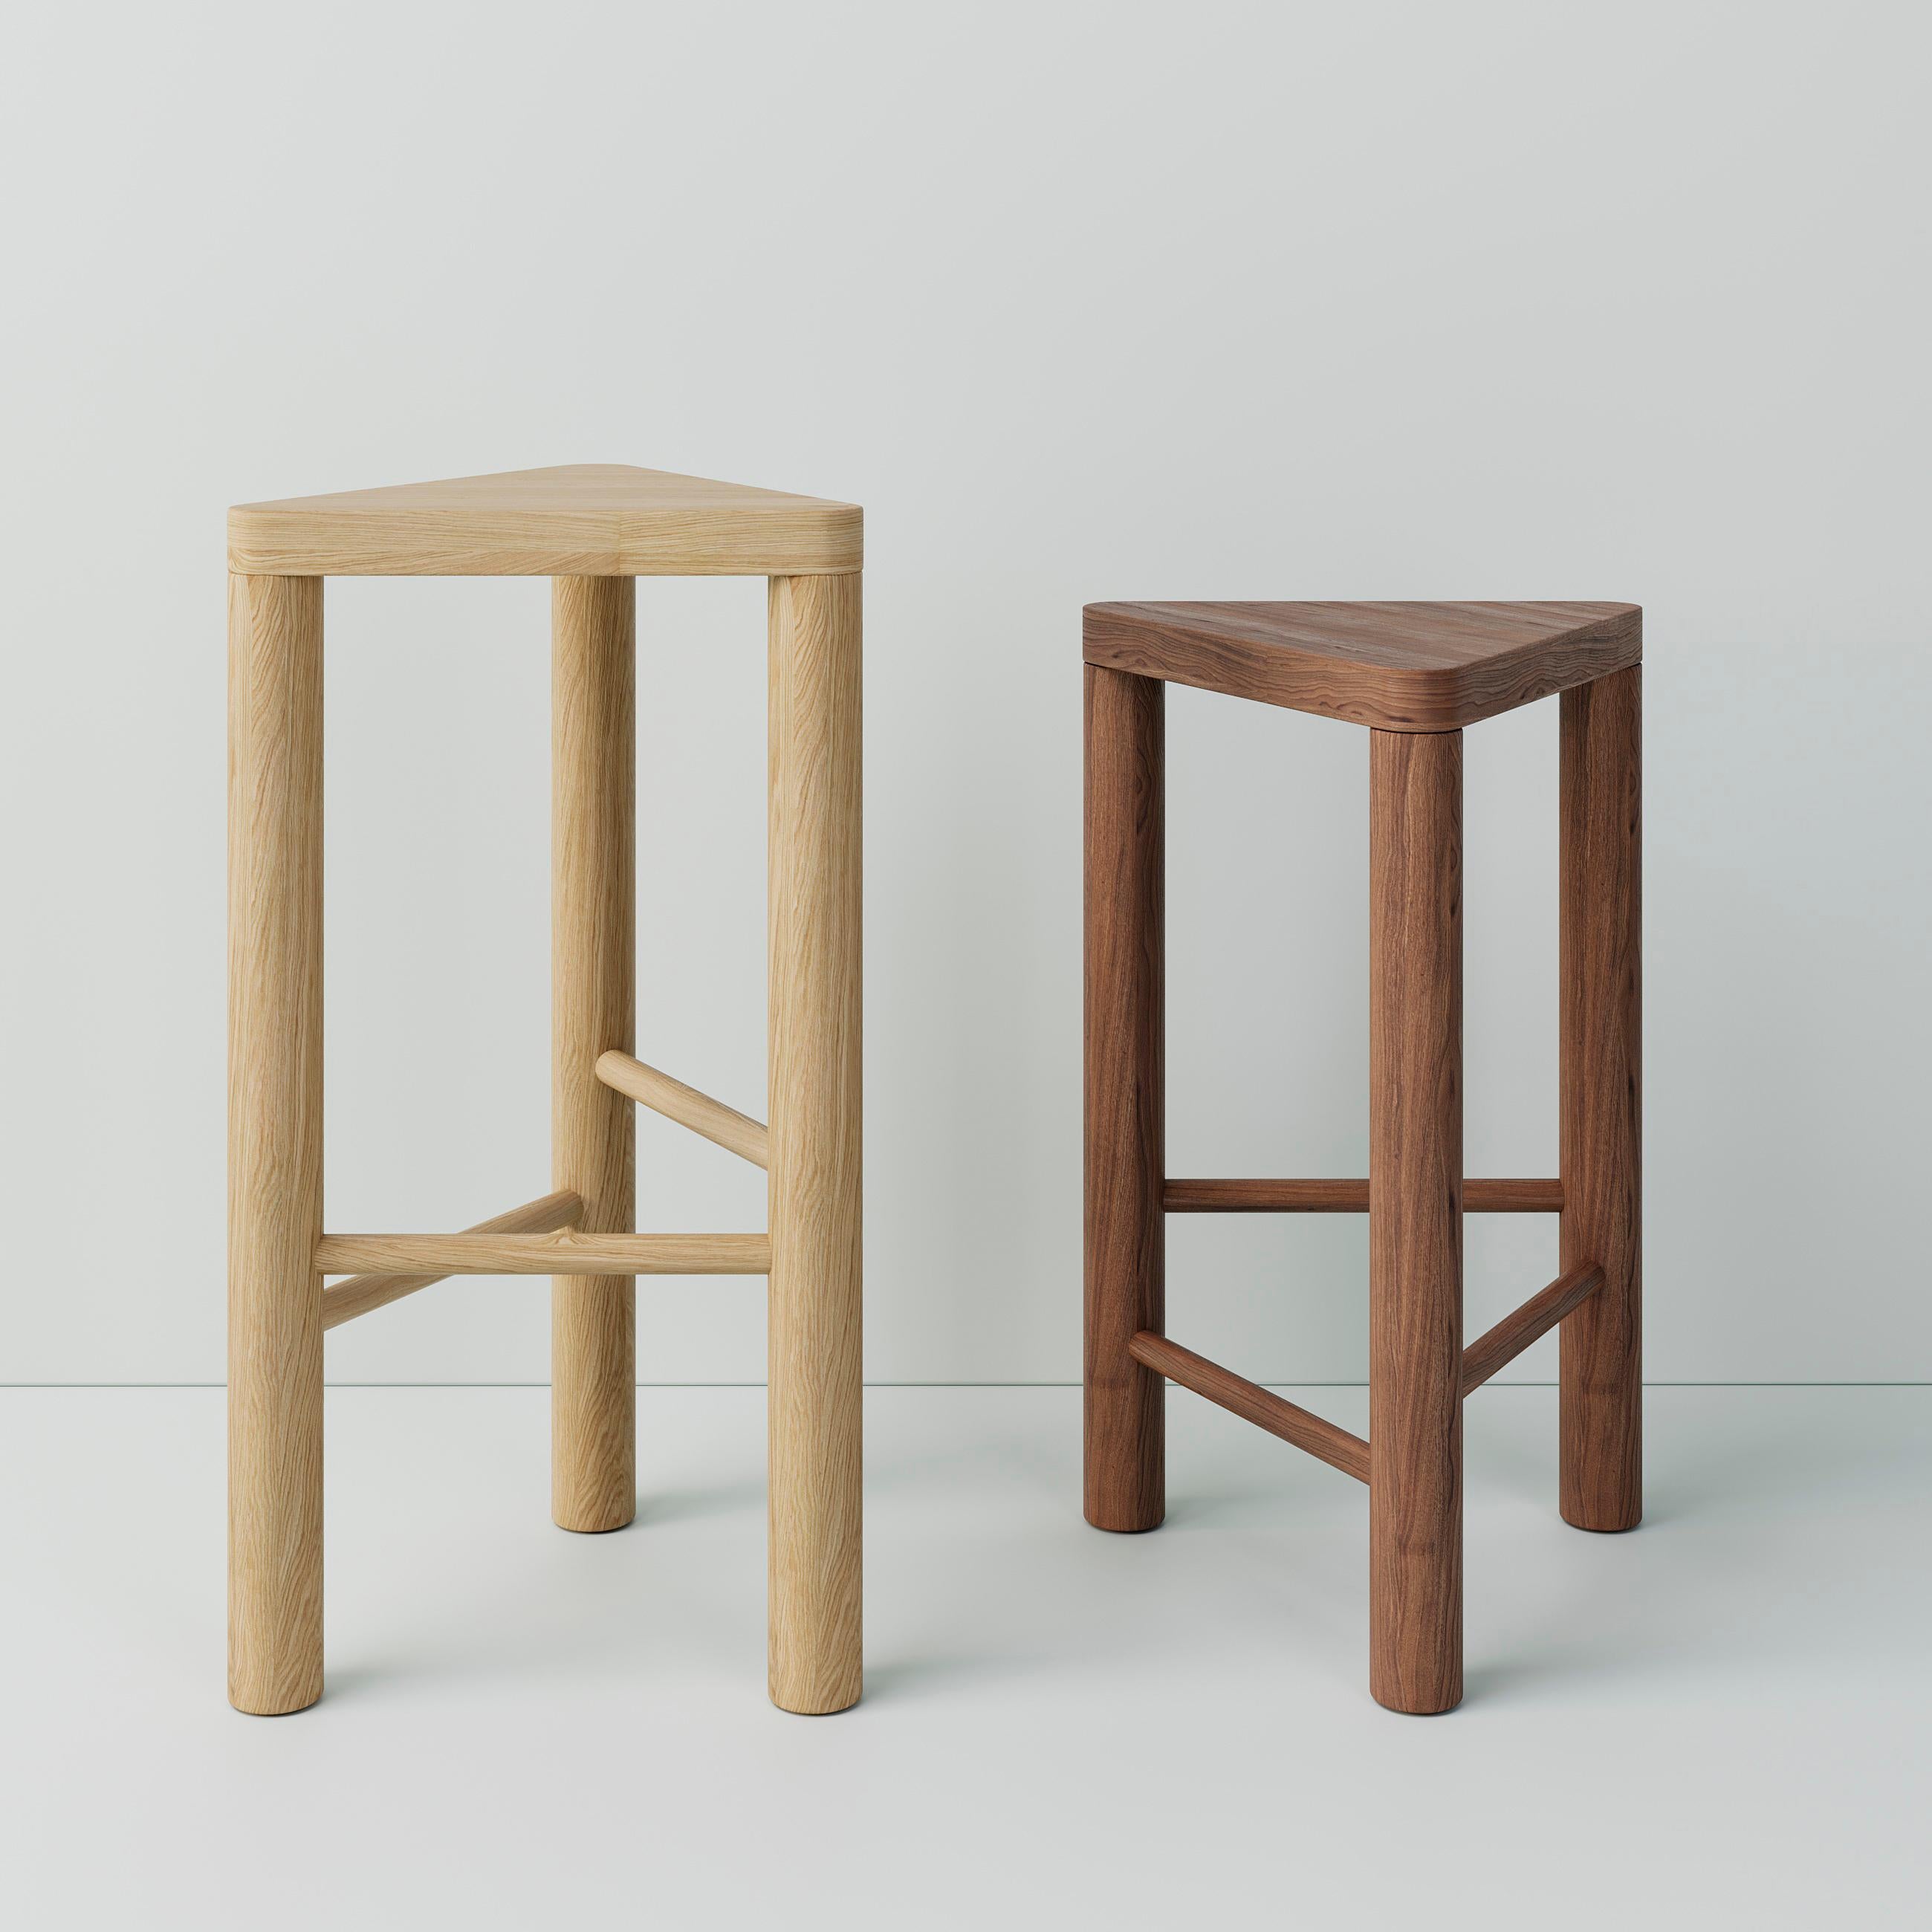 Wooden Stool 'Anyday' by Oitoproducts
Stain: Natural

Materials: Ash wood / Oak wood

Dimensions:
H 75 cm x W 41 x D 36,5 cm
H 29,5 in x W 16 in x D 14,4 in

About
Anyday is a collection of basic monolithic furniture collection. This is